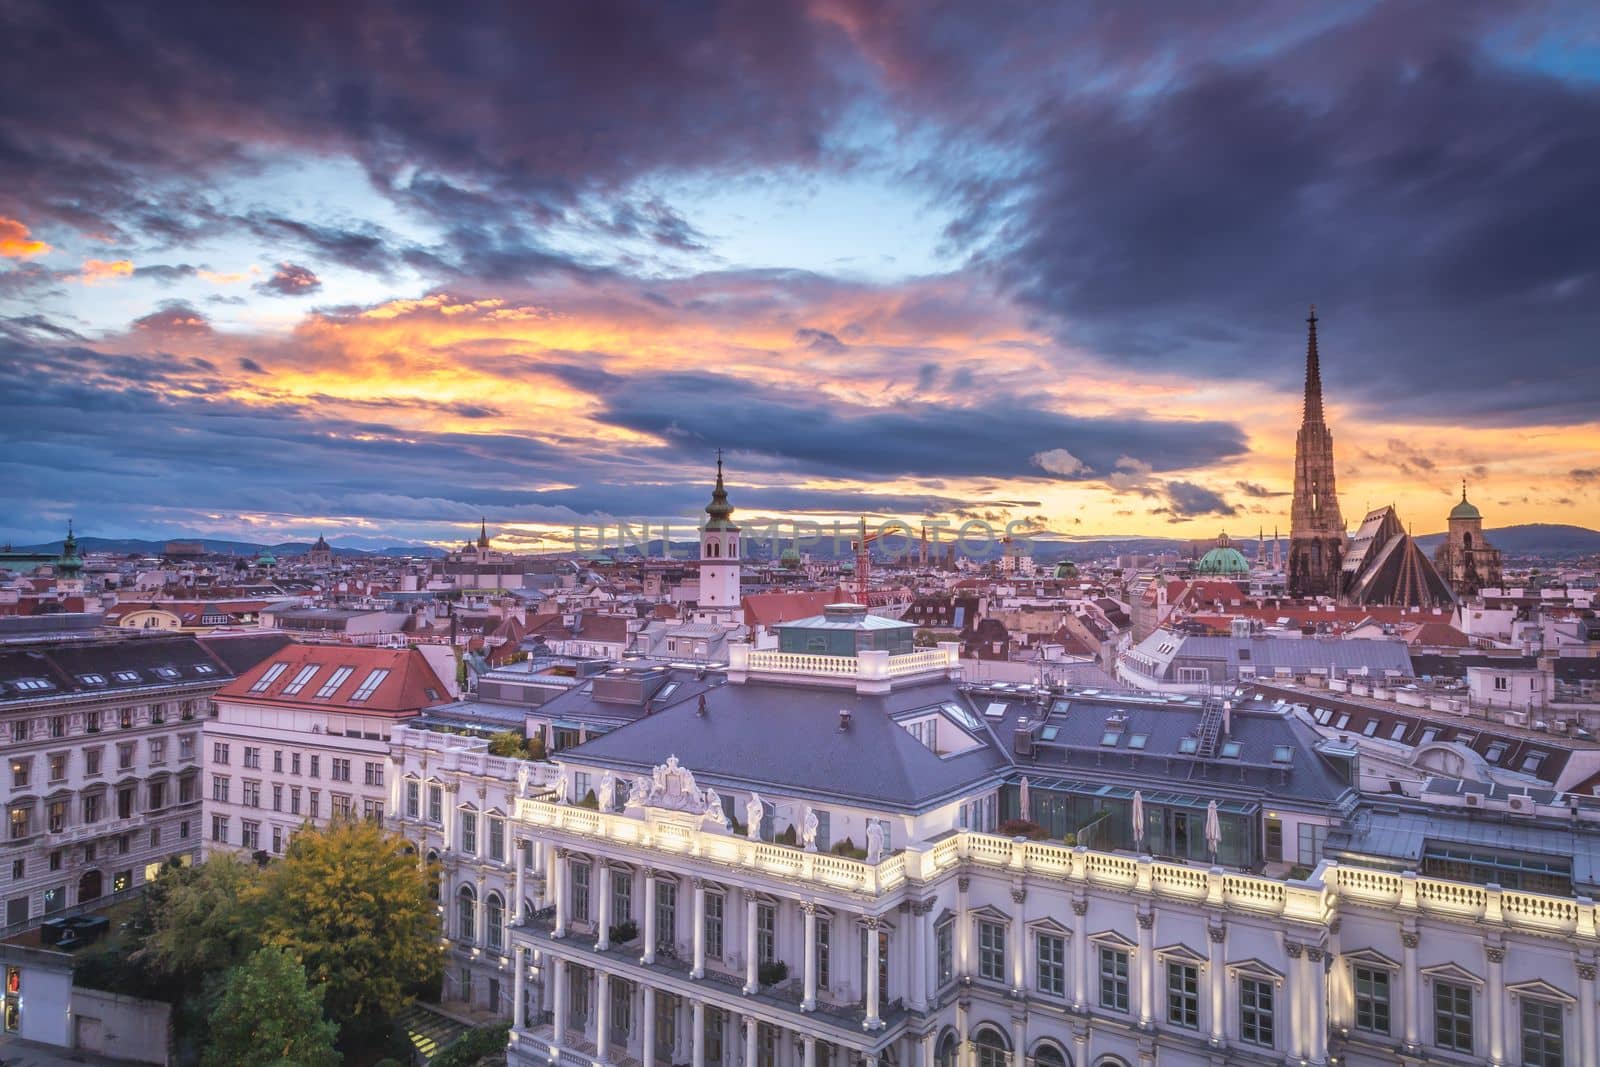 Panoramic view of Vienna cityscape with Cathedrals and domes from above, Austria by positivetravelart